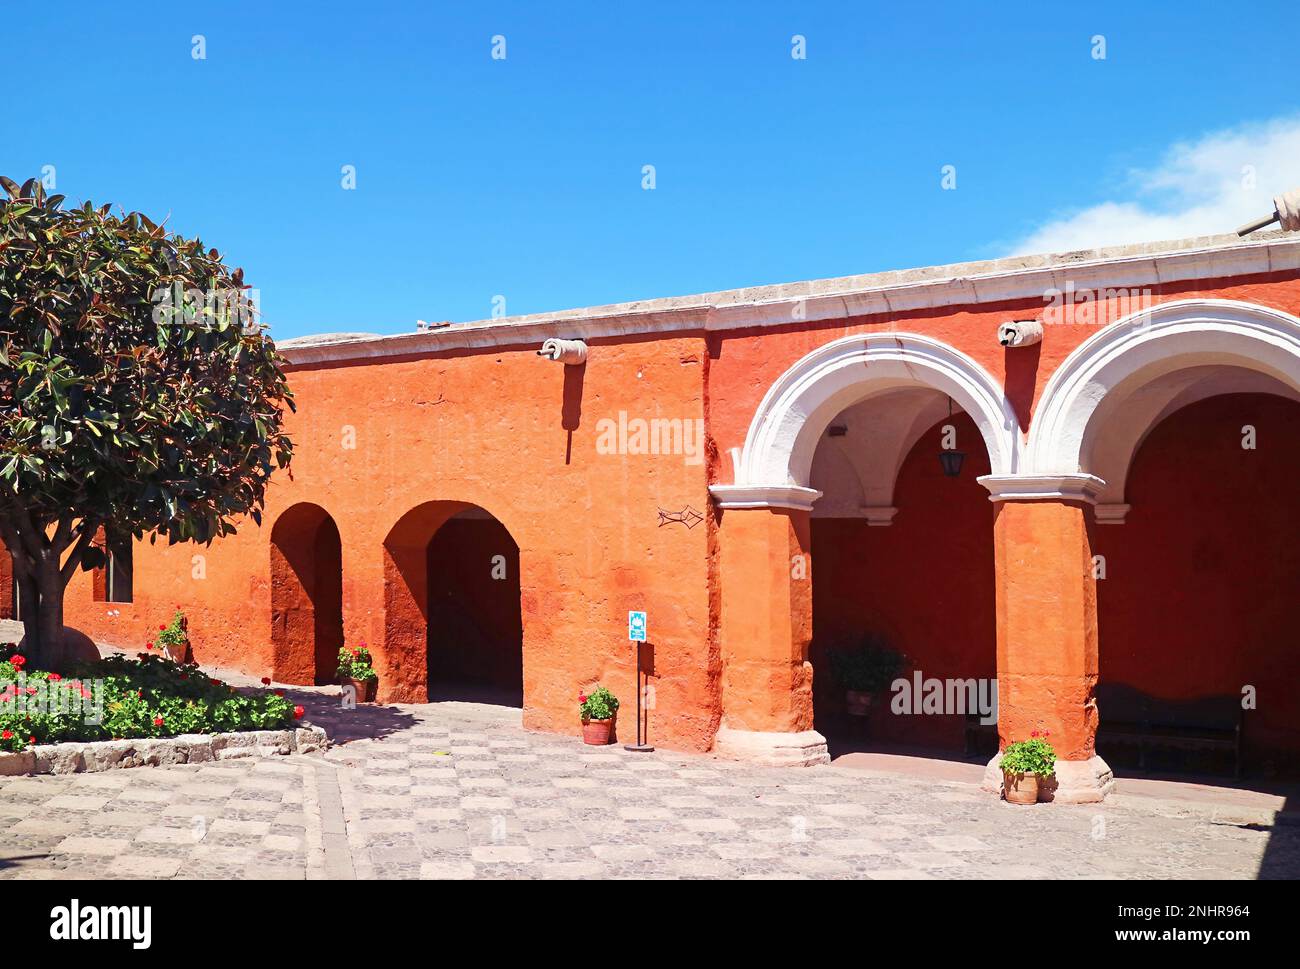 Stunning Cloister with Orange Red Colored Stone Archway of the Convent of Santa Catalina de Siena in Arequipa, Peru, South America Stock Photo